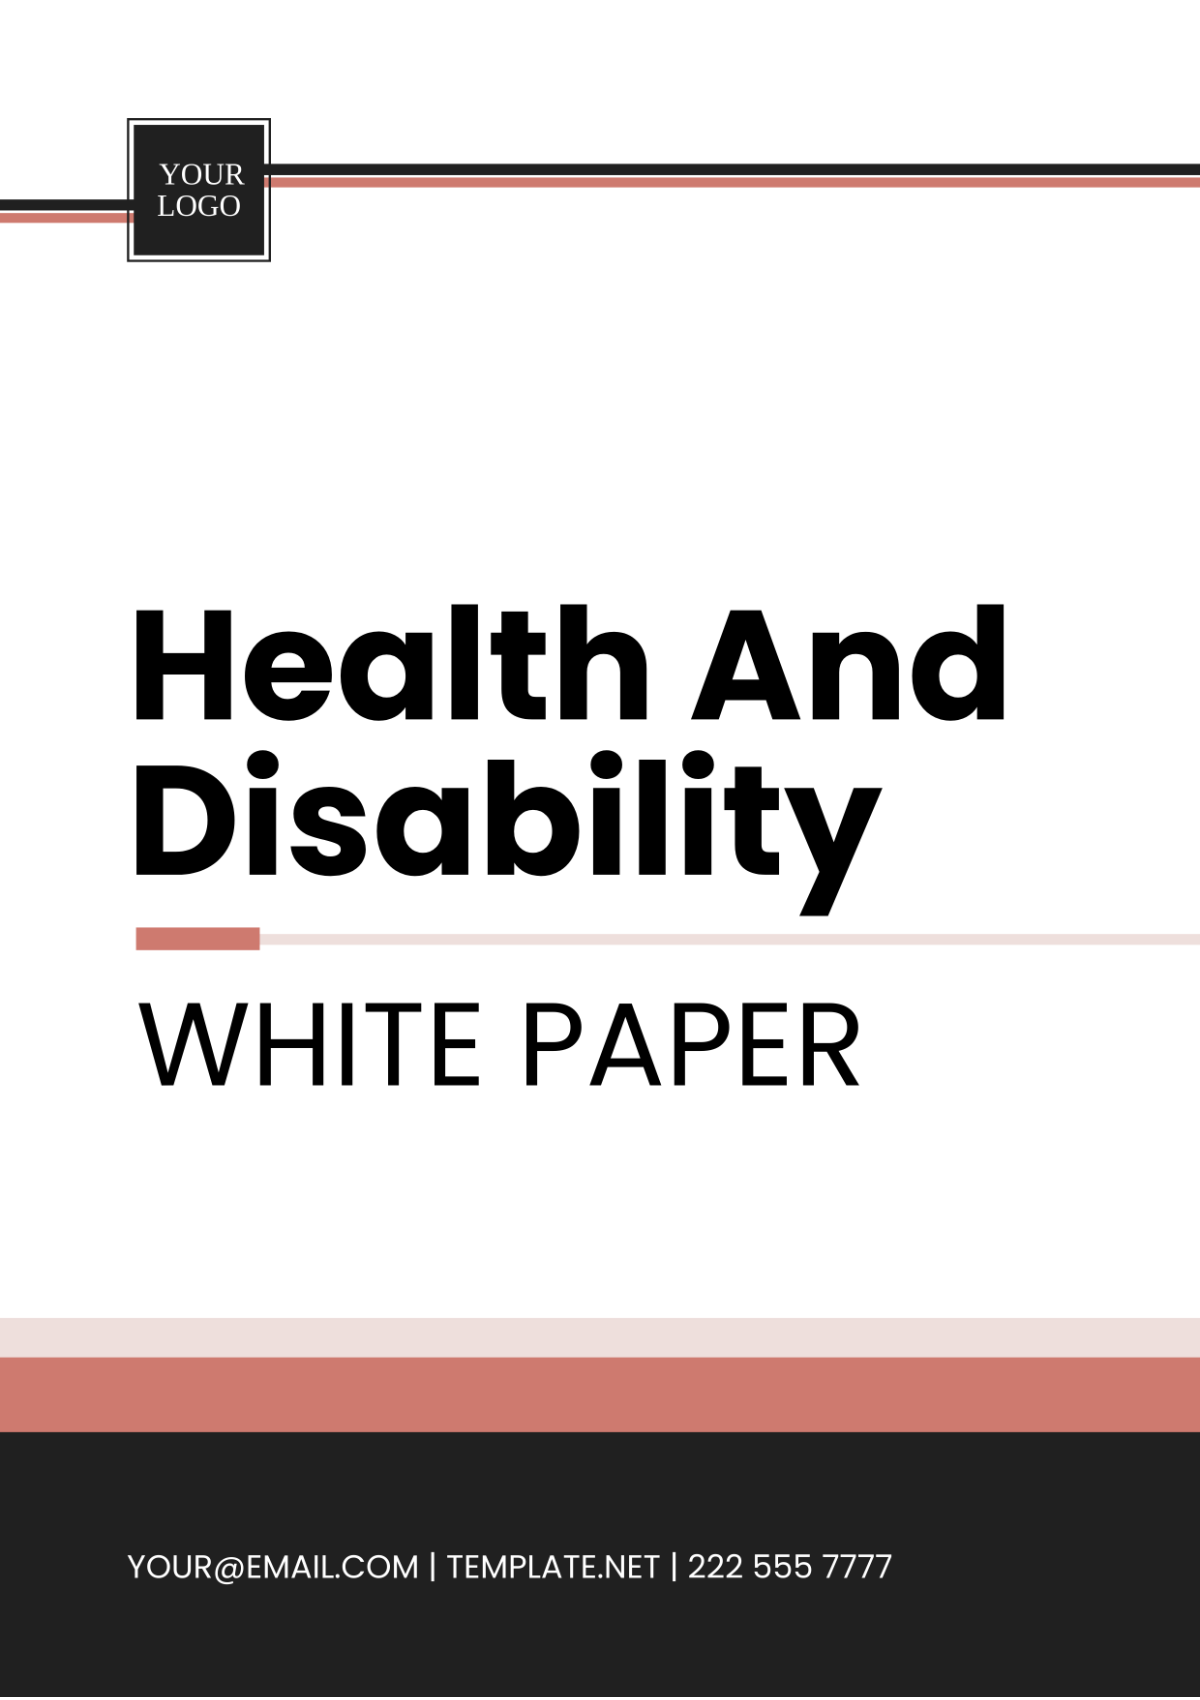 Health And Disability White Paper Template